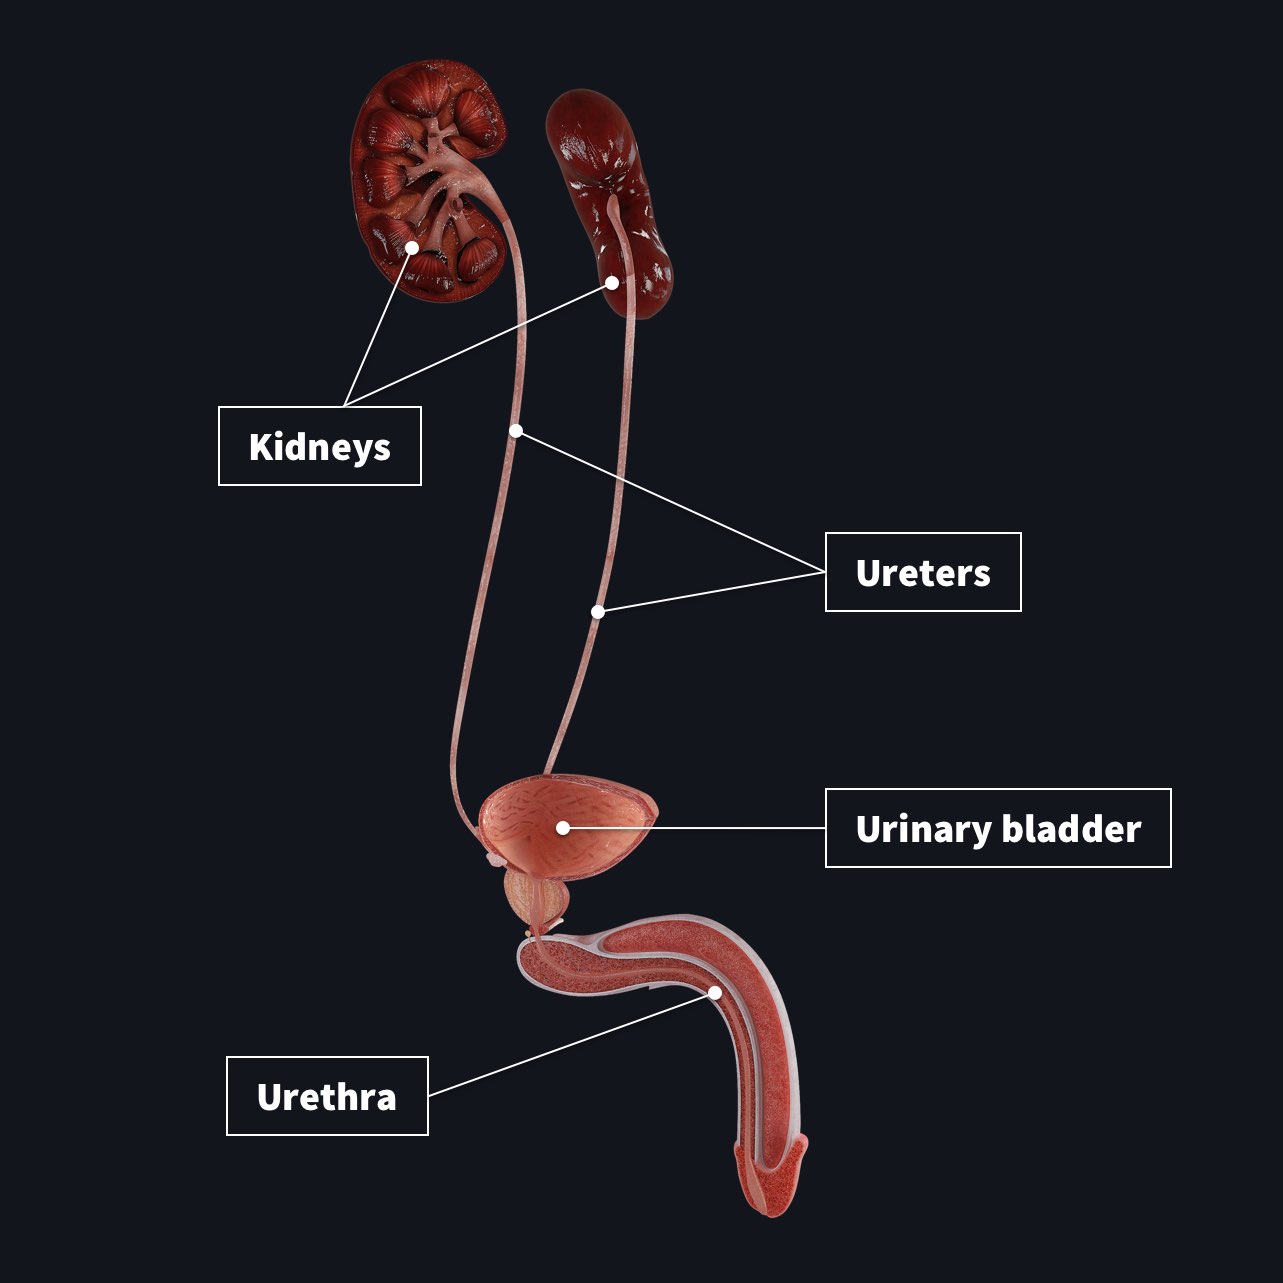 The male urinary system with Kidneys, ureters, urinary bladder and urethrea labelled